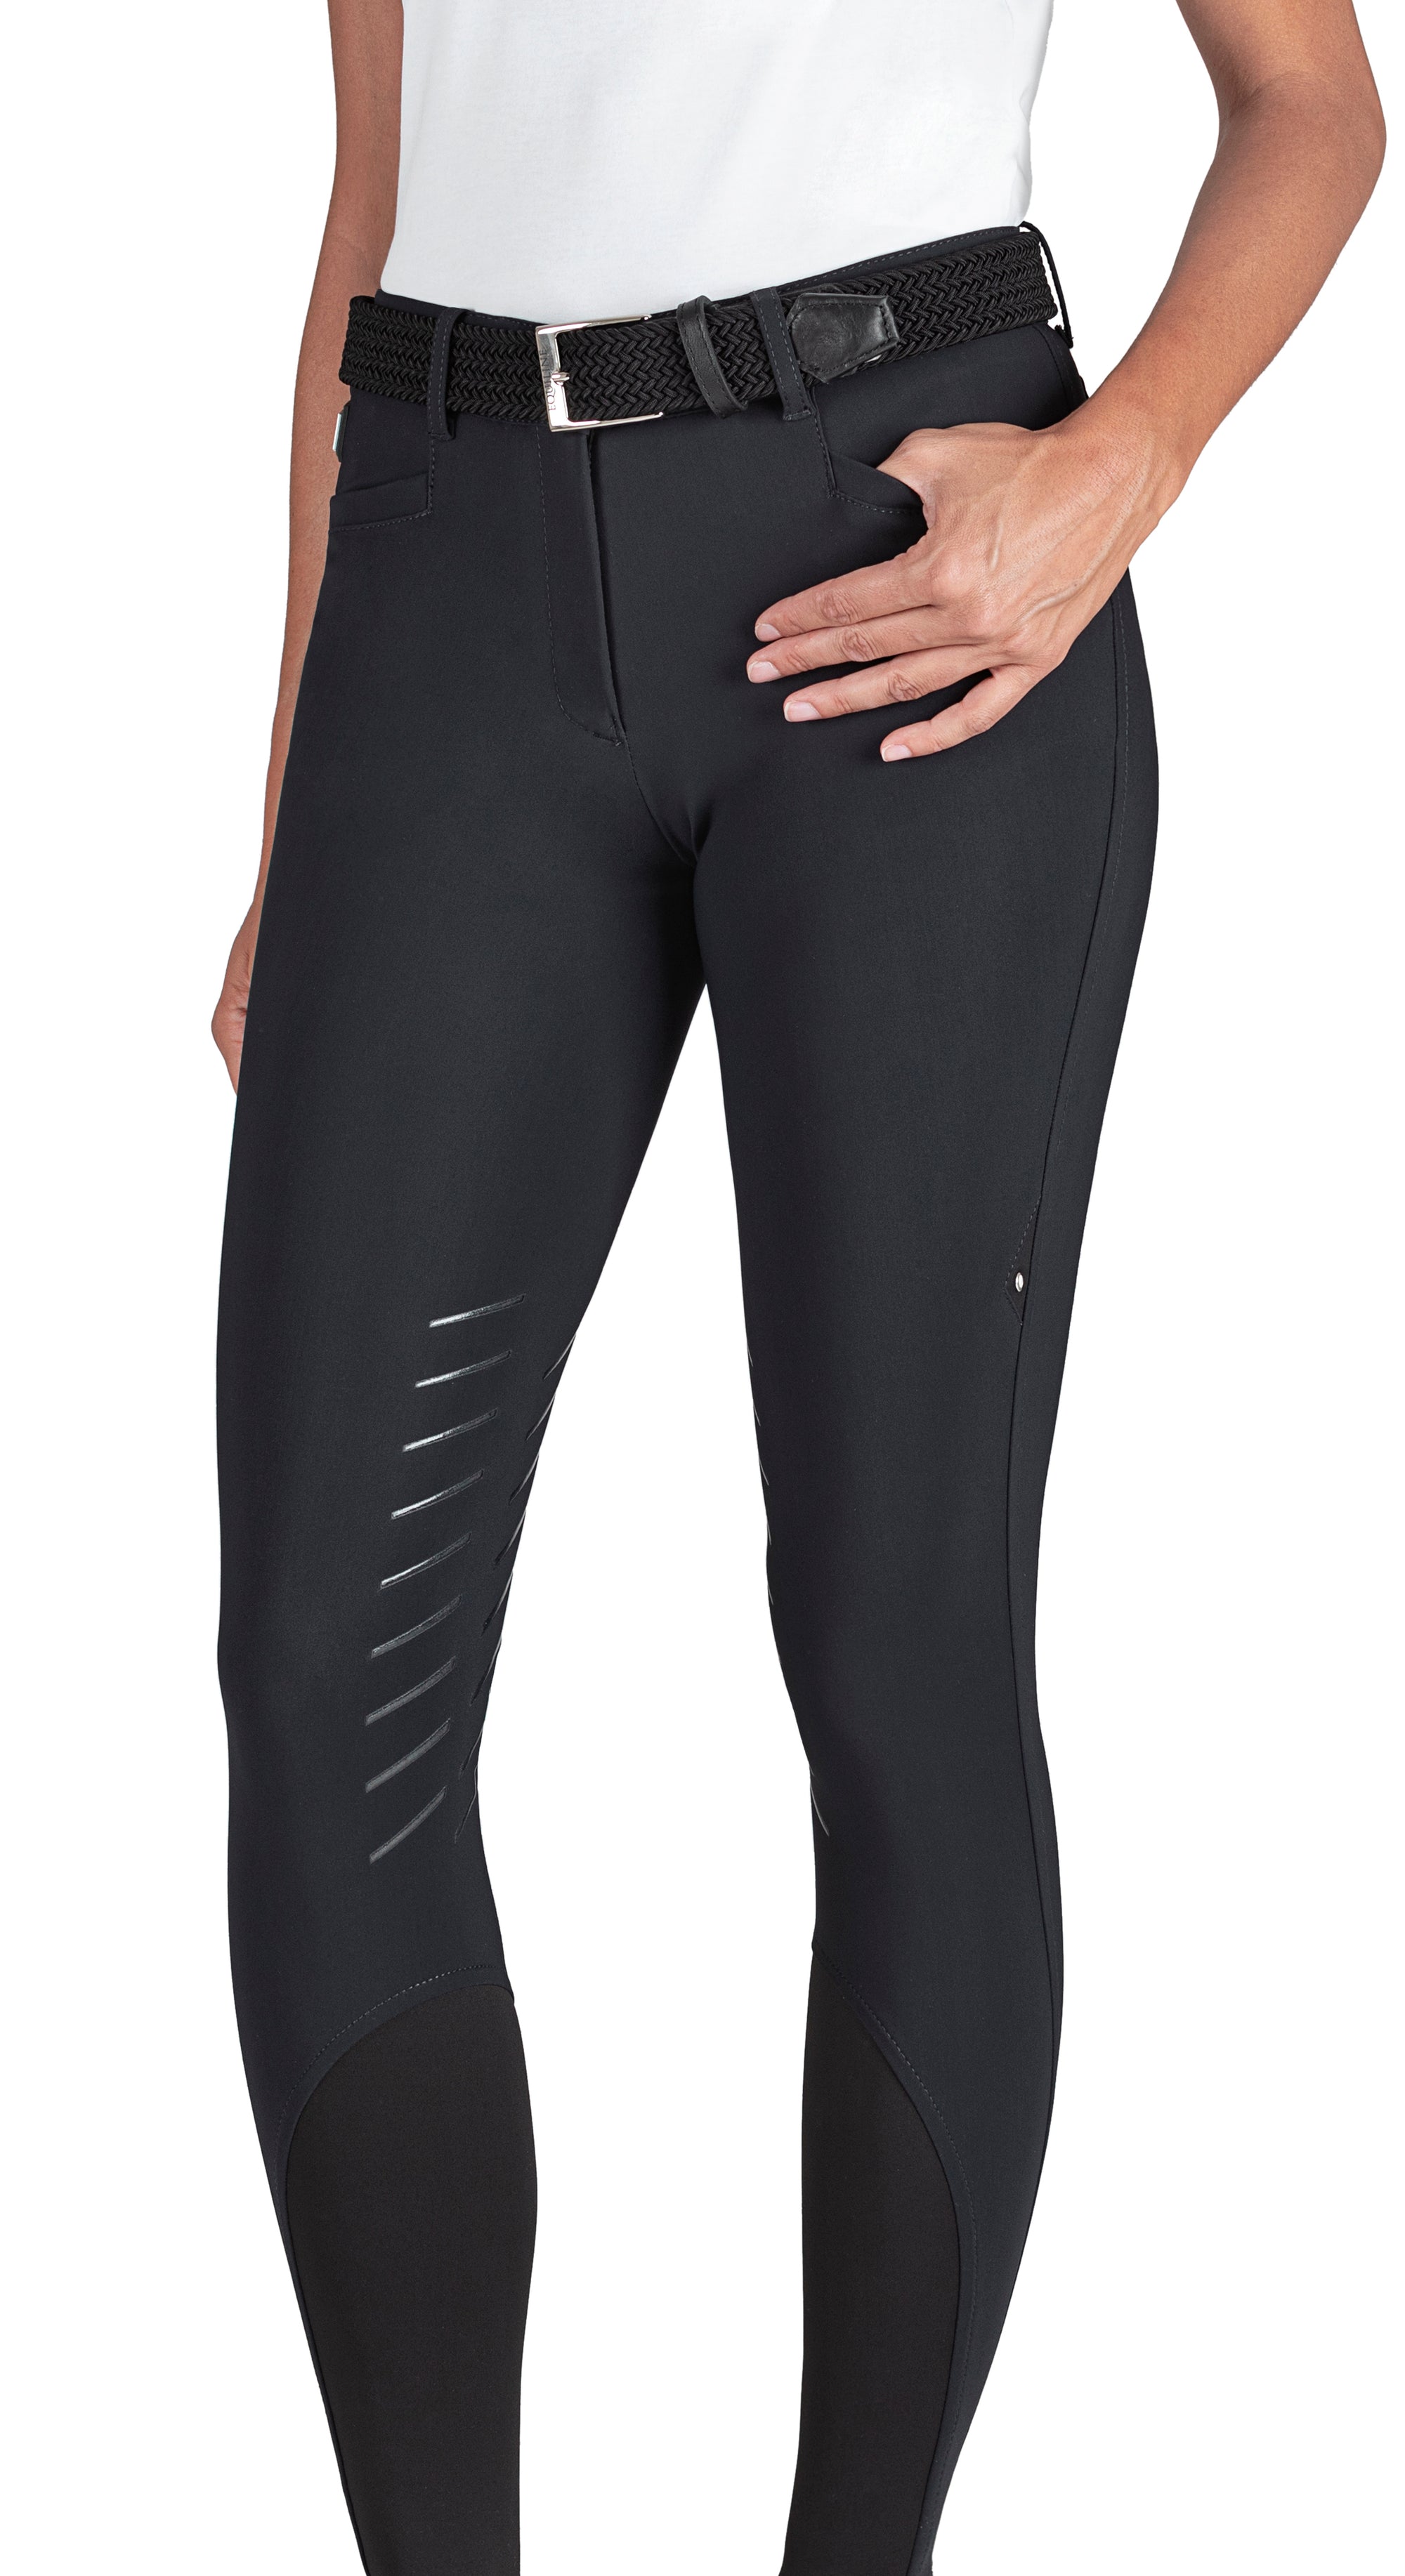 Equiline CatirK B-Move Light Women's Breeches - Exceptional Equestrian